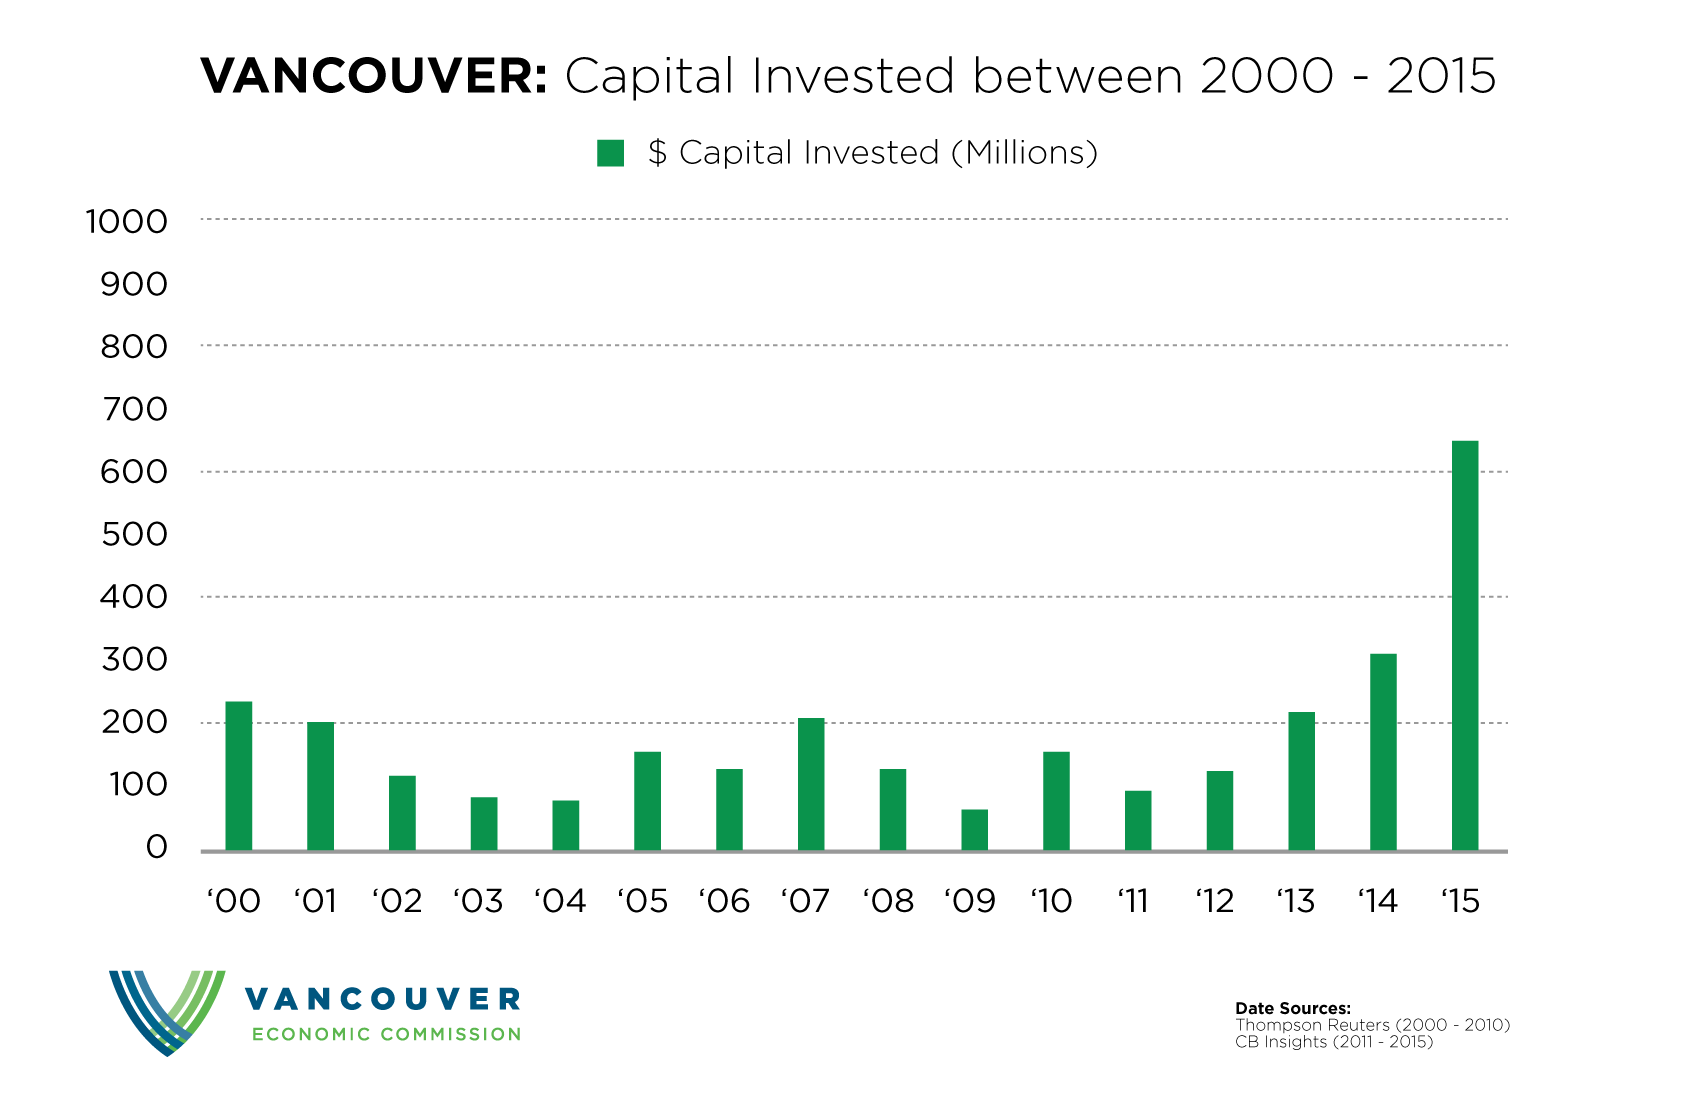 Capital invested in Vancouver between 2000 - 2015. Presented by the Vancouver Economic Commission. Data Sources: Thompson Reuters & CB Insights.